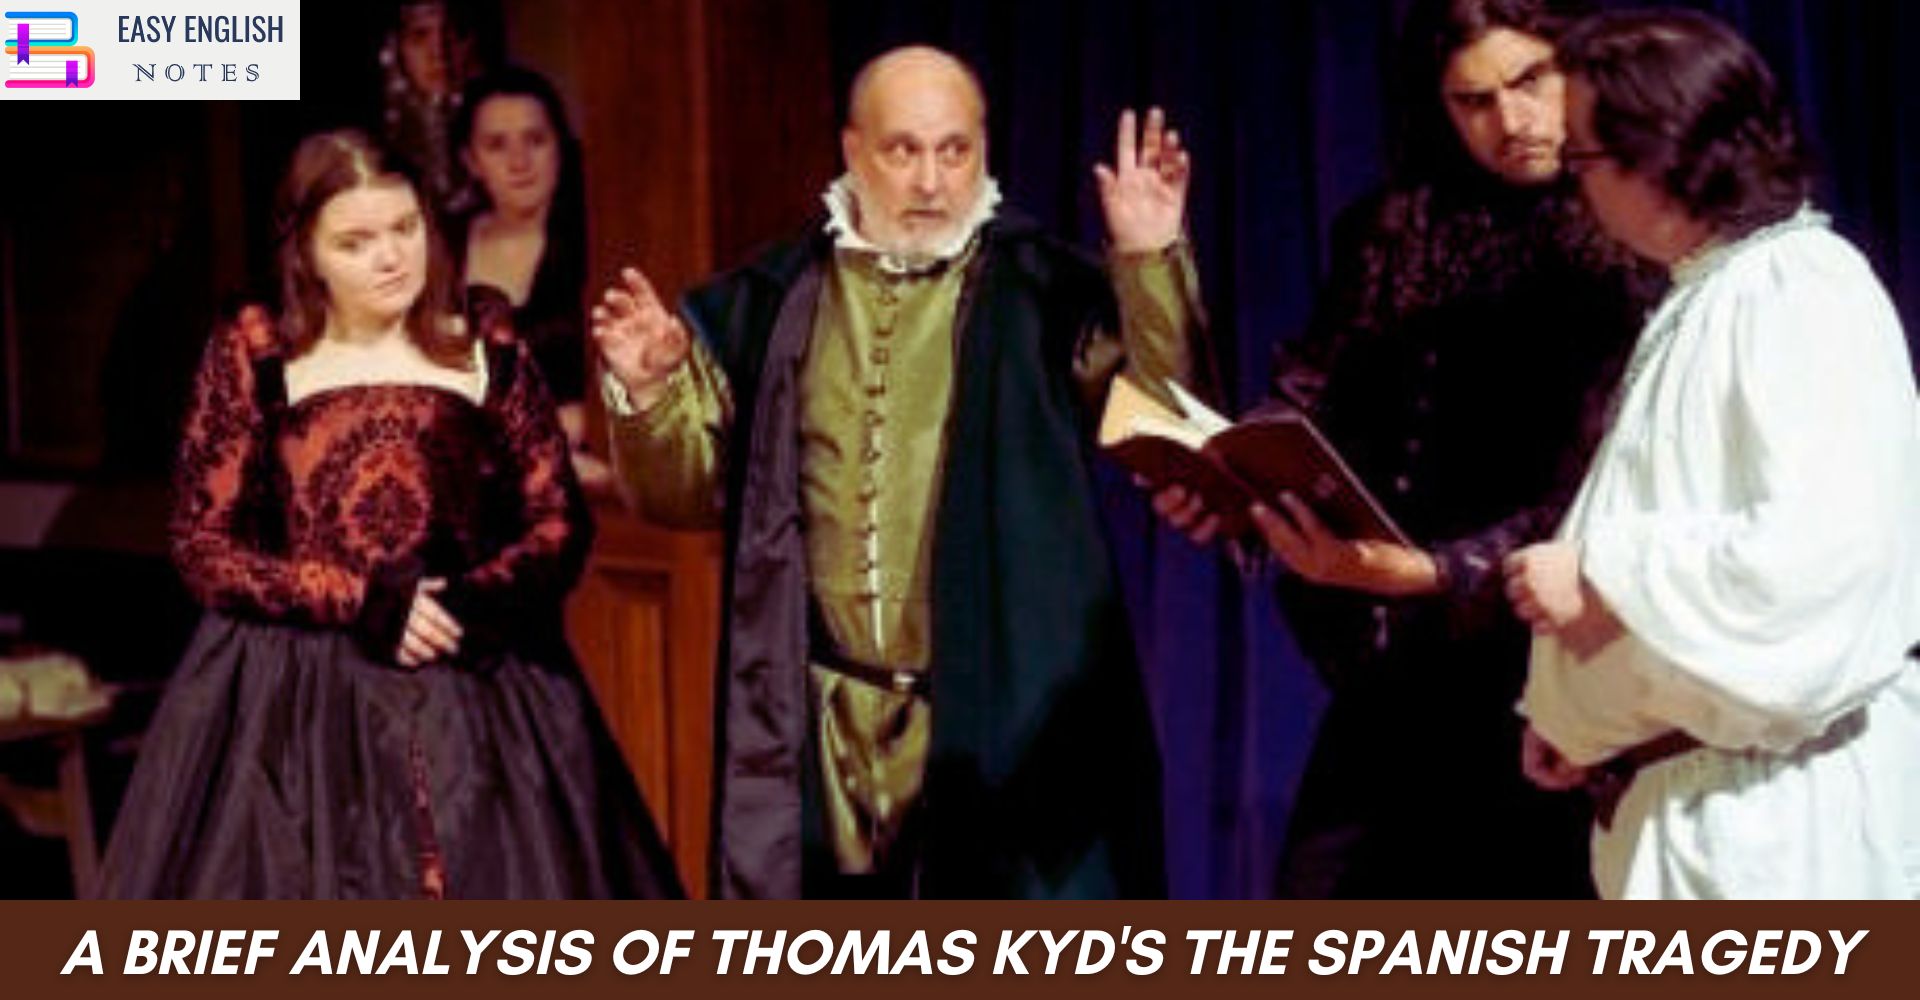 A brief Analysis of Thomas Kyd's The Spanish Tragedy